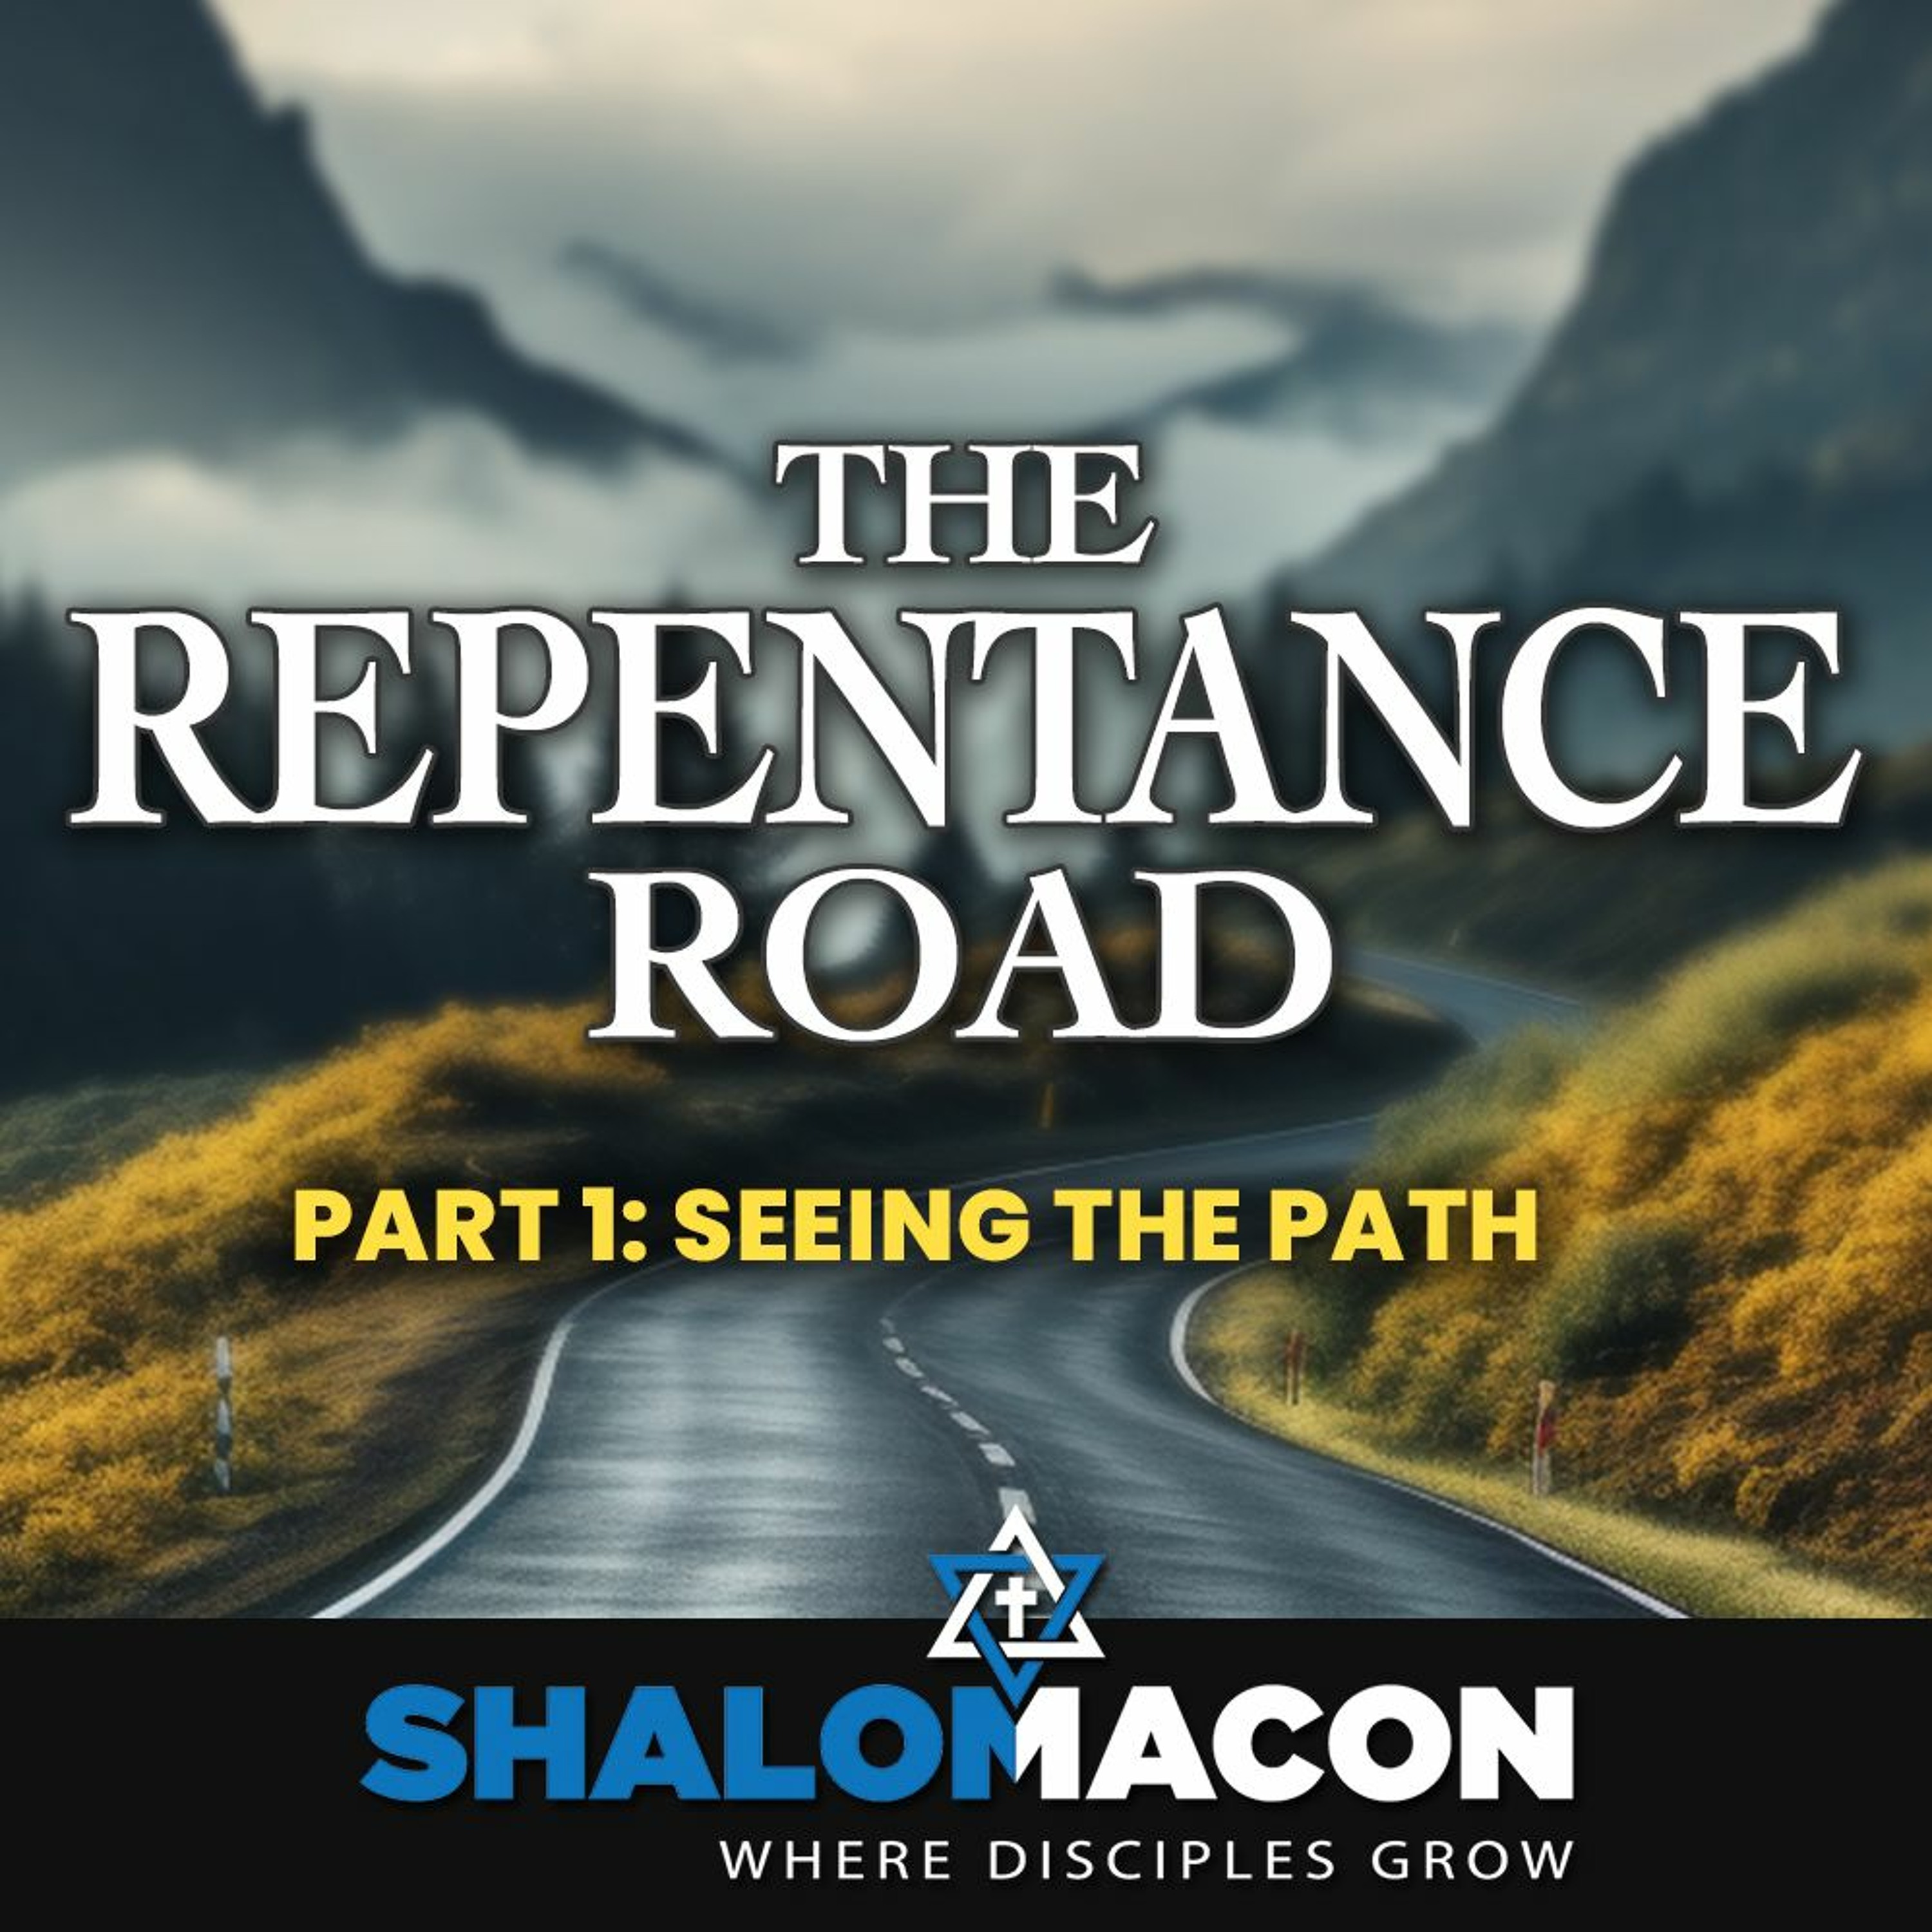 The Repentance Road, Part 1: Seeing The Path